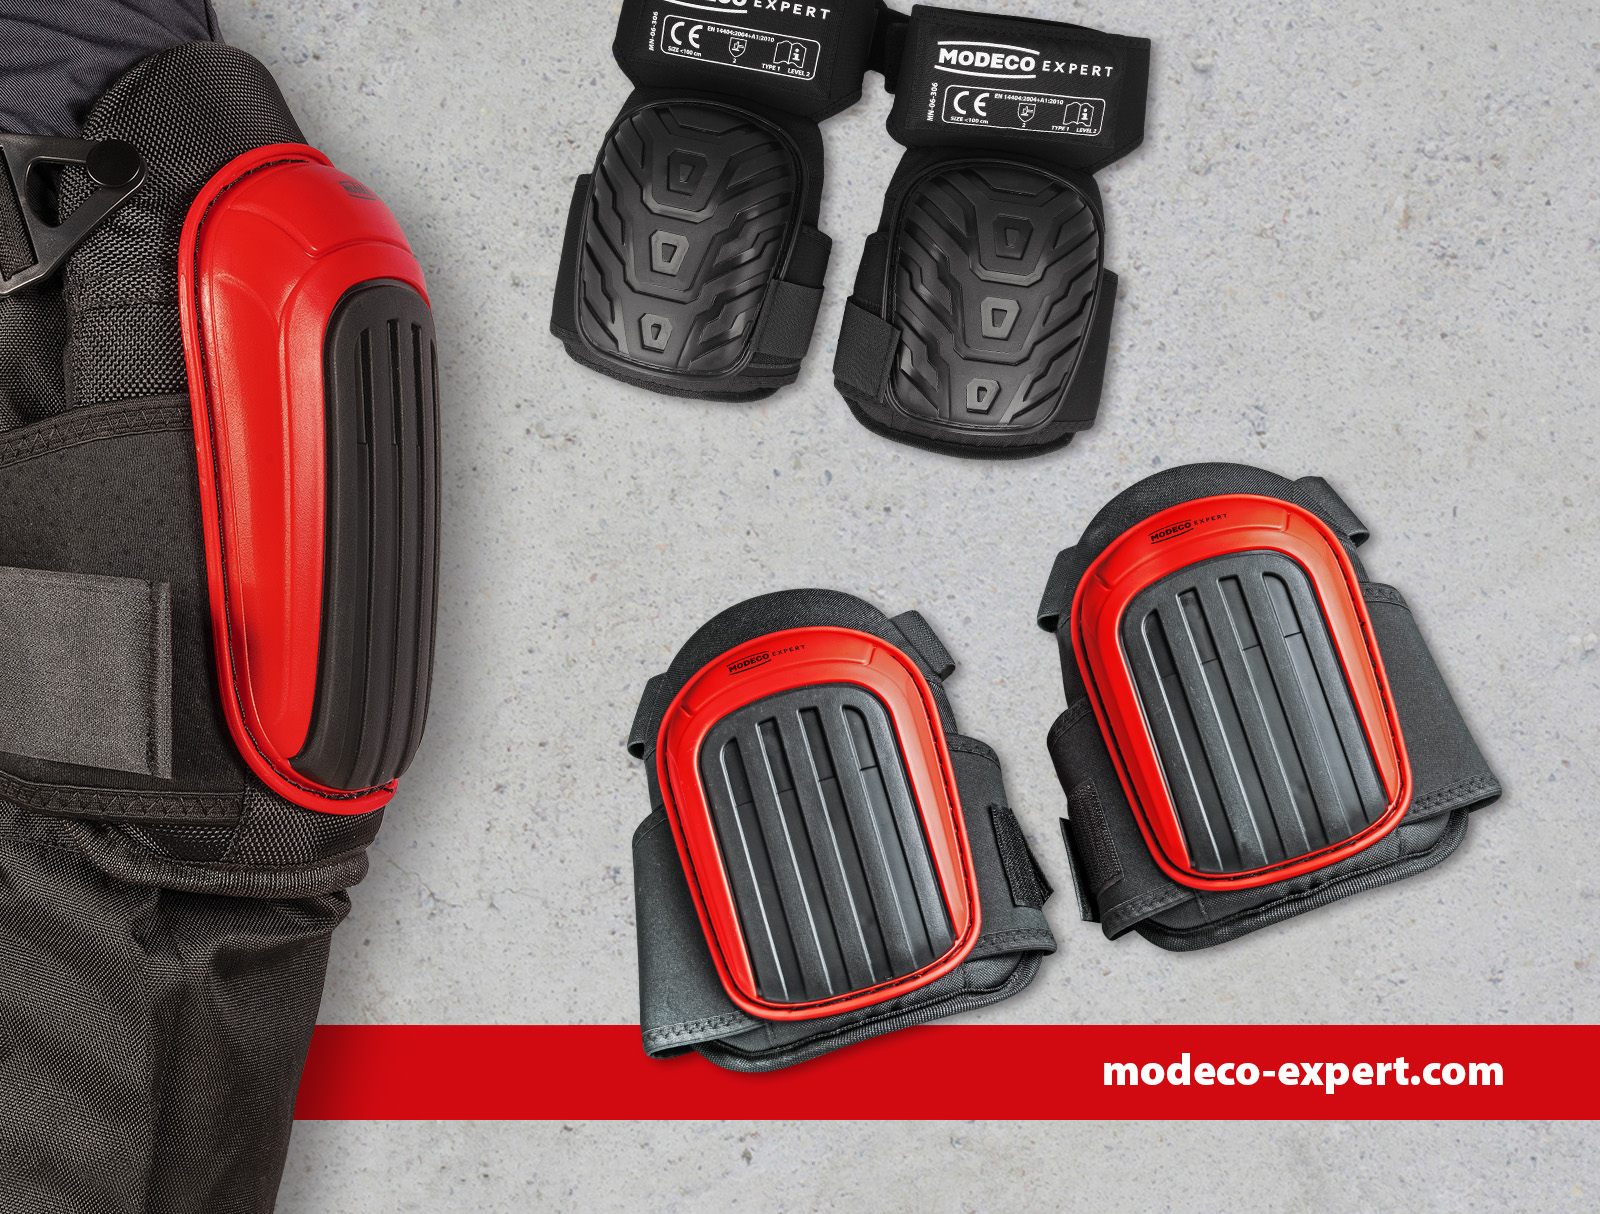 New! Modeco Expert and Home Tools knee pads